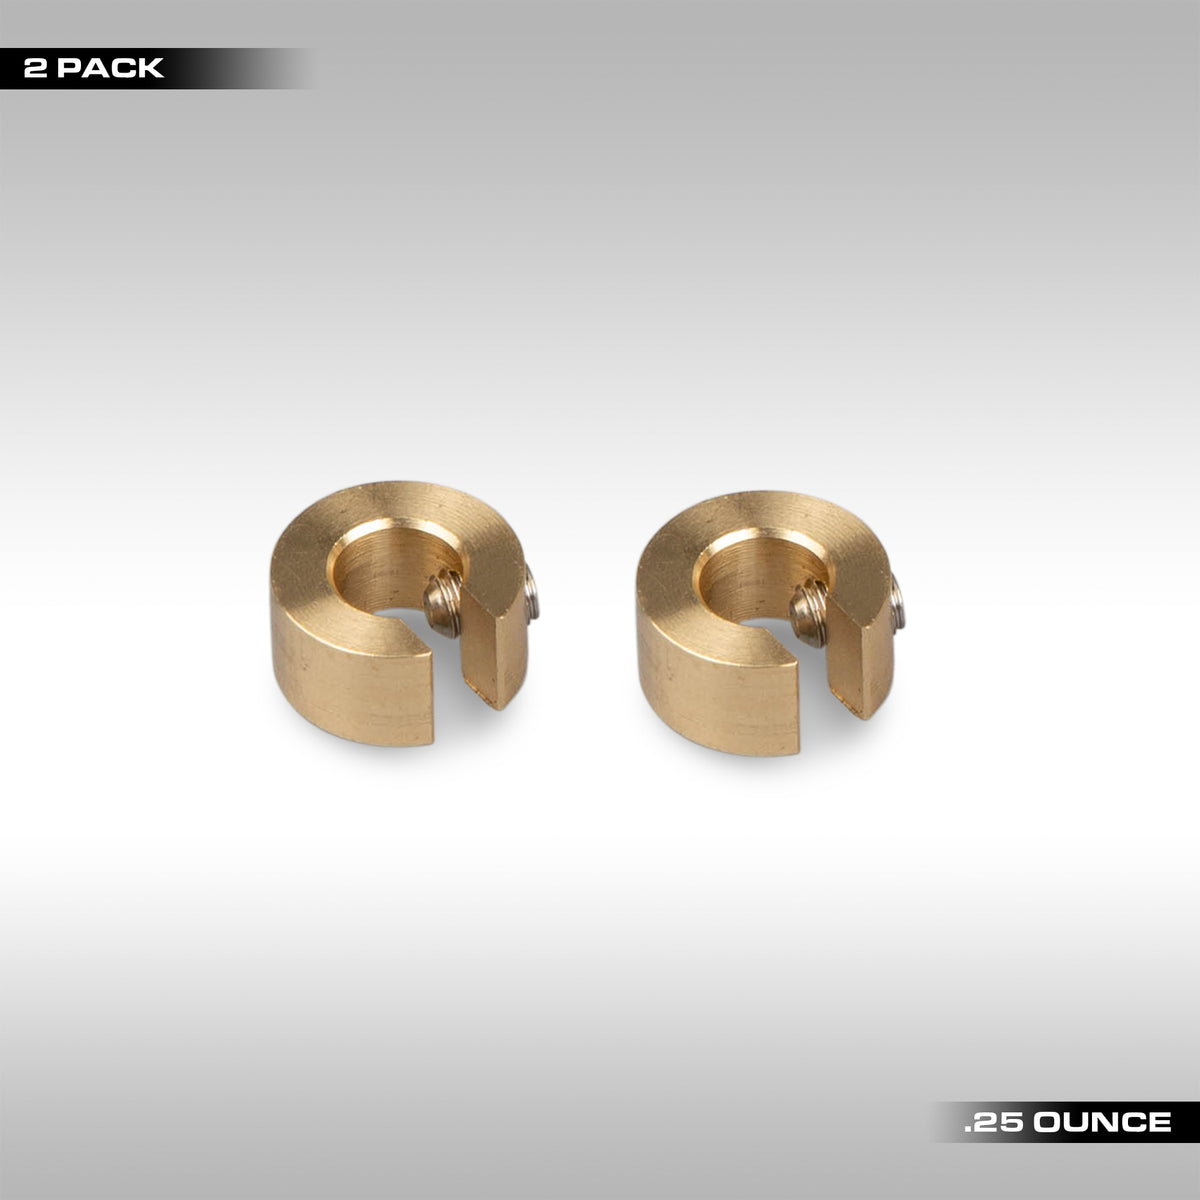 2 pack .25 ounce No-Mar wheel weights for balancing your motorcycle wheels. Machined brass weights are designed to lock onto the spokes with a set screw letting you get the perfect balance for your wheels. No Mar motorcycle wheel weights.